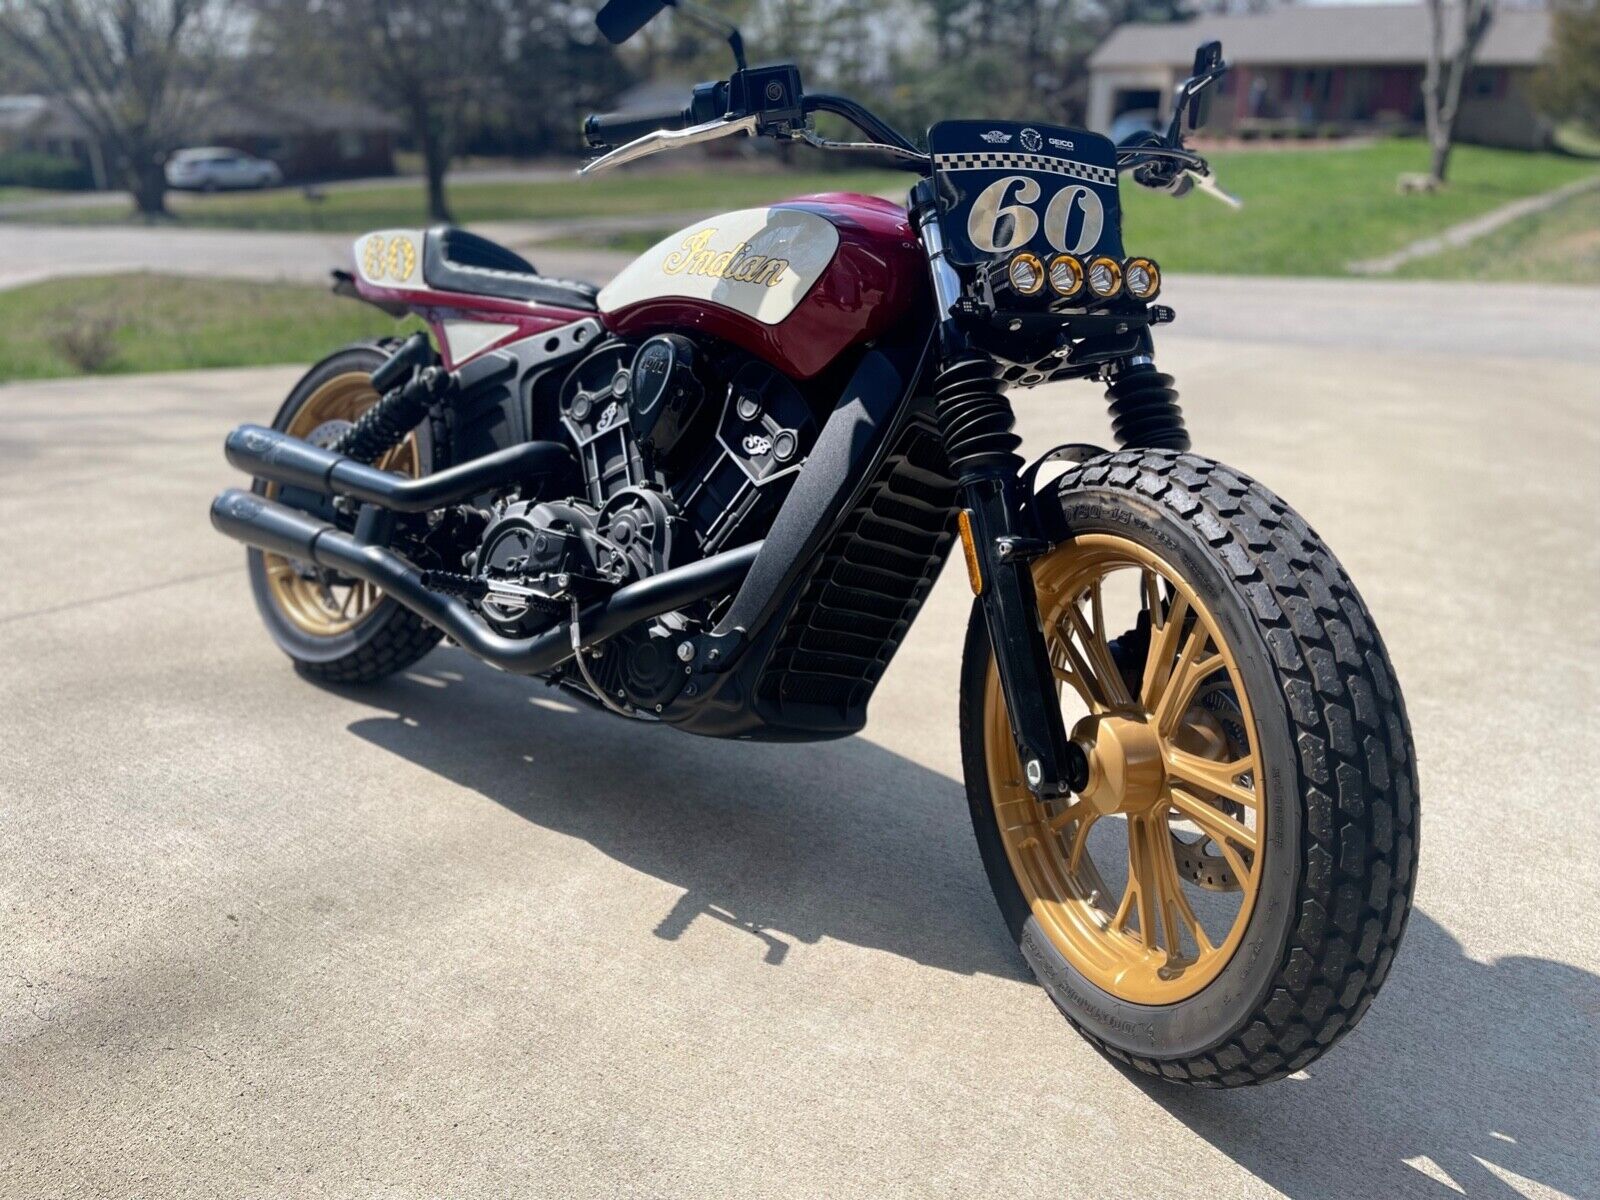 Review: Indian Scout Bobber is an eye-catching motorcycle